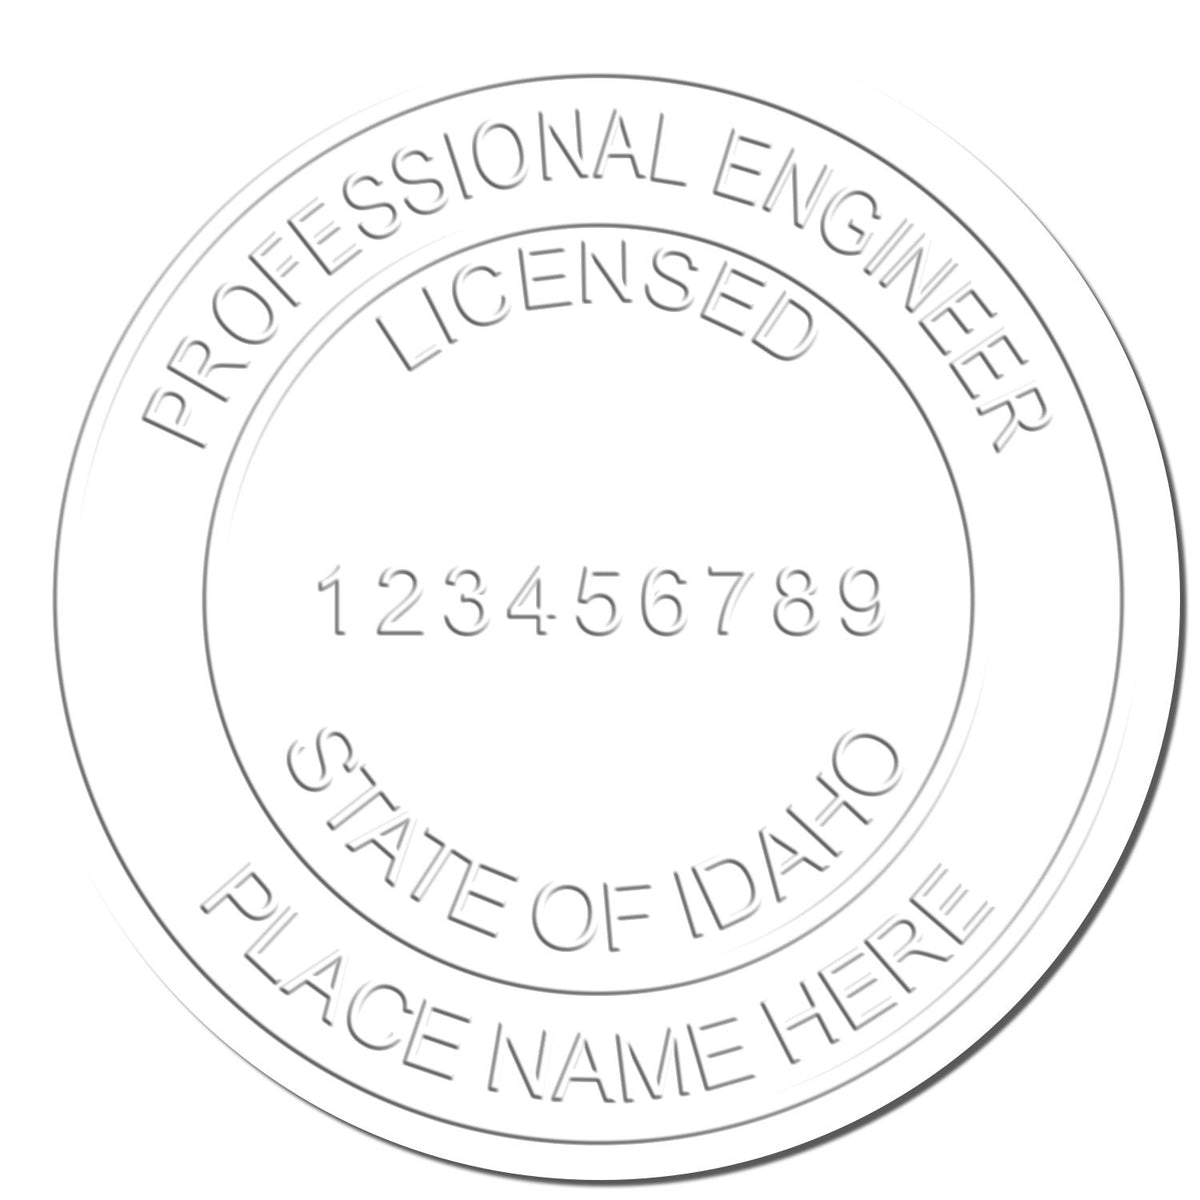 This paper is stamped with a sample imprint of the State of Idaho Extended Long Reach Engineer Seal, signifying its quality and reliability.